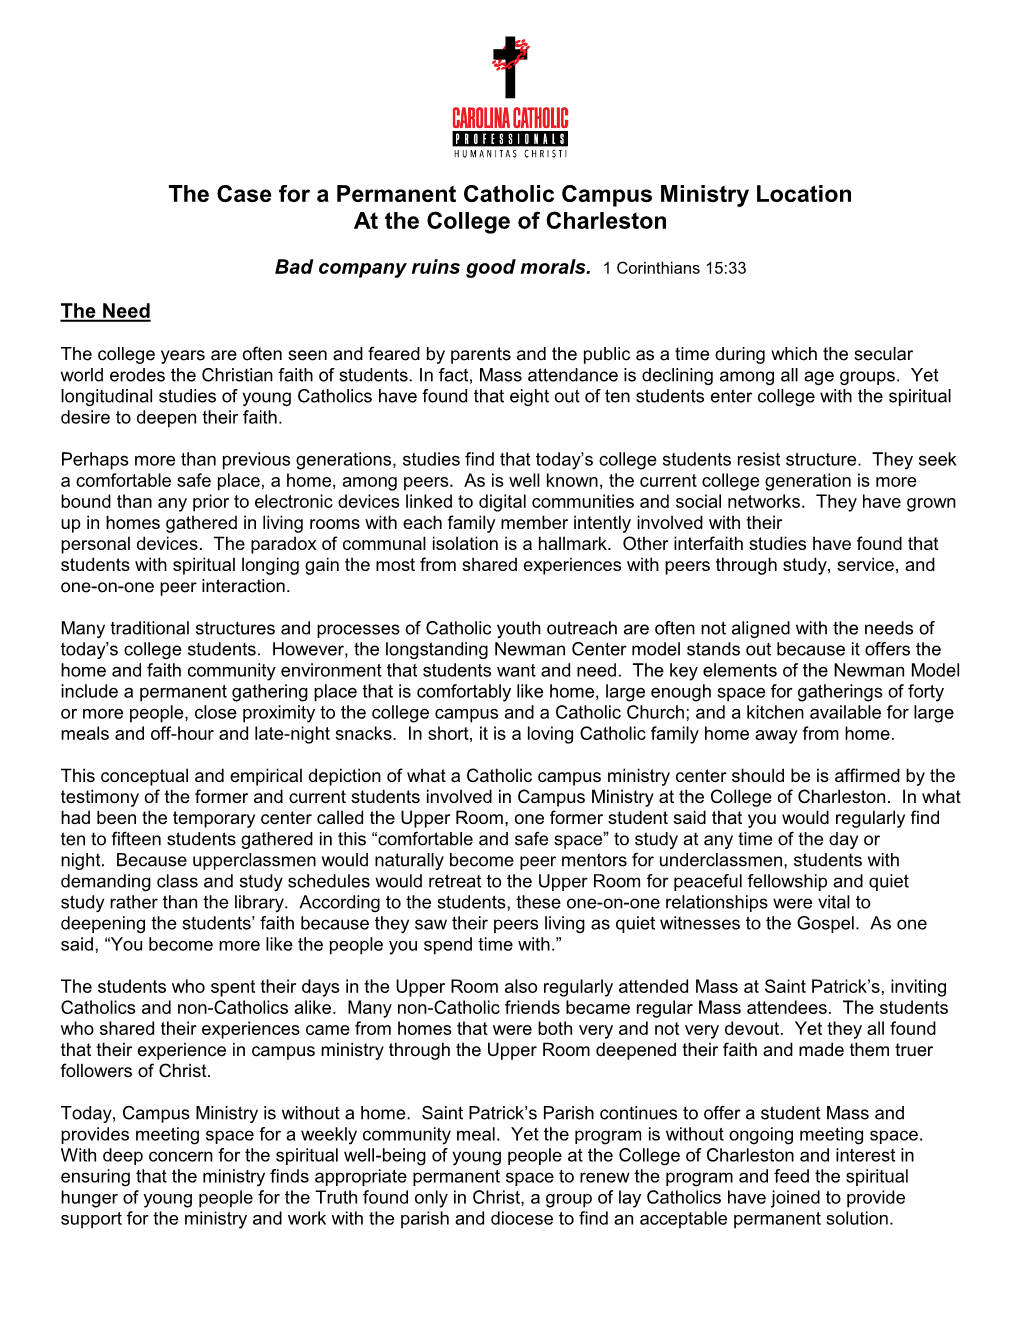 The Case for a Permanent Catholic Campus Ministry Location at the College of Charleston